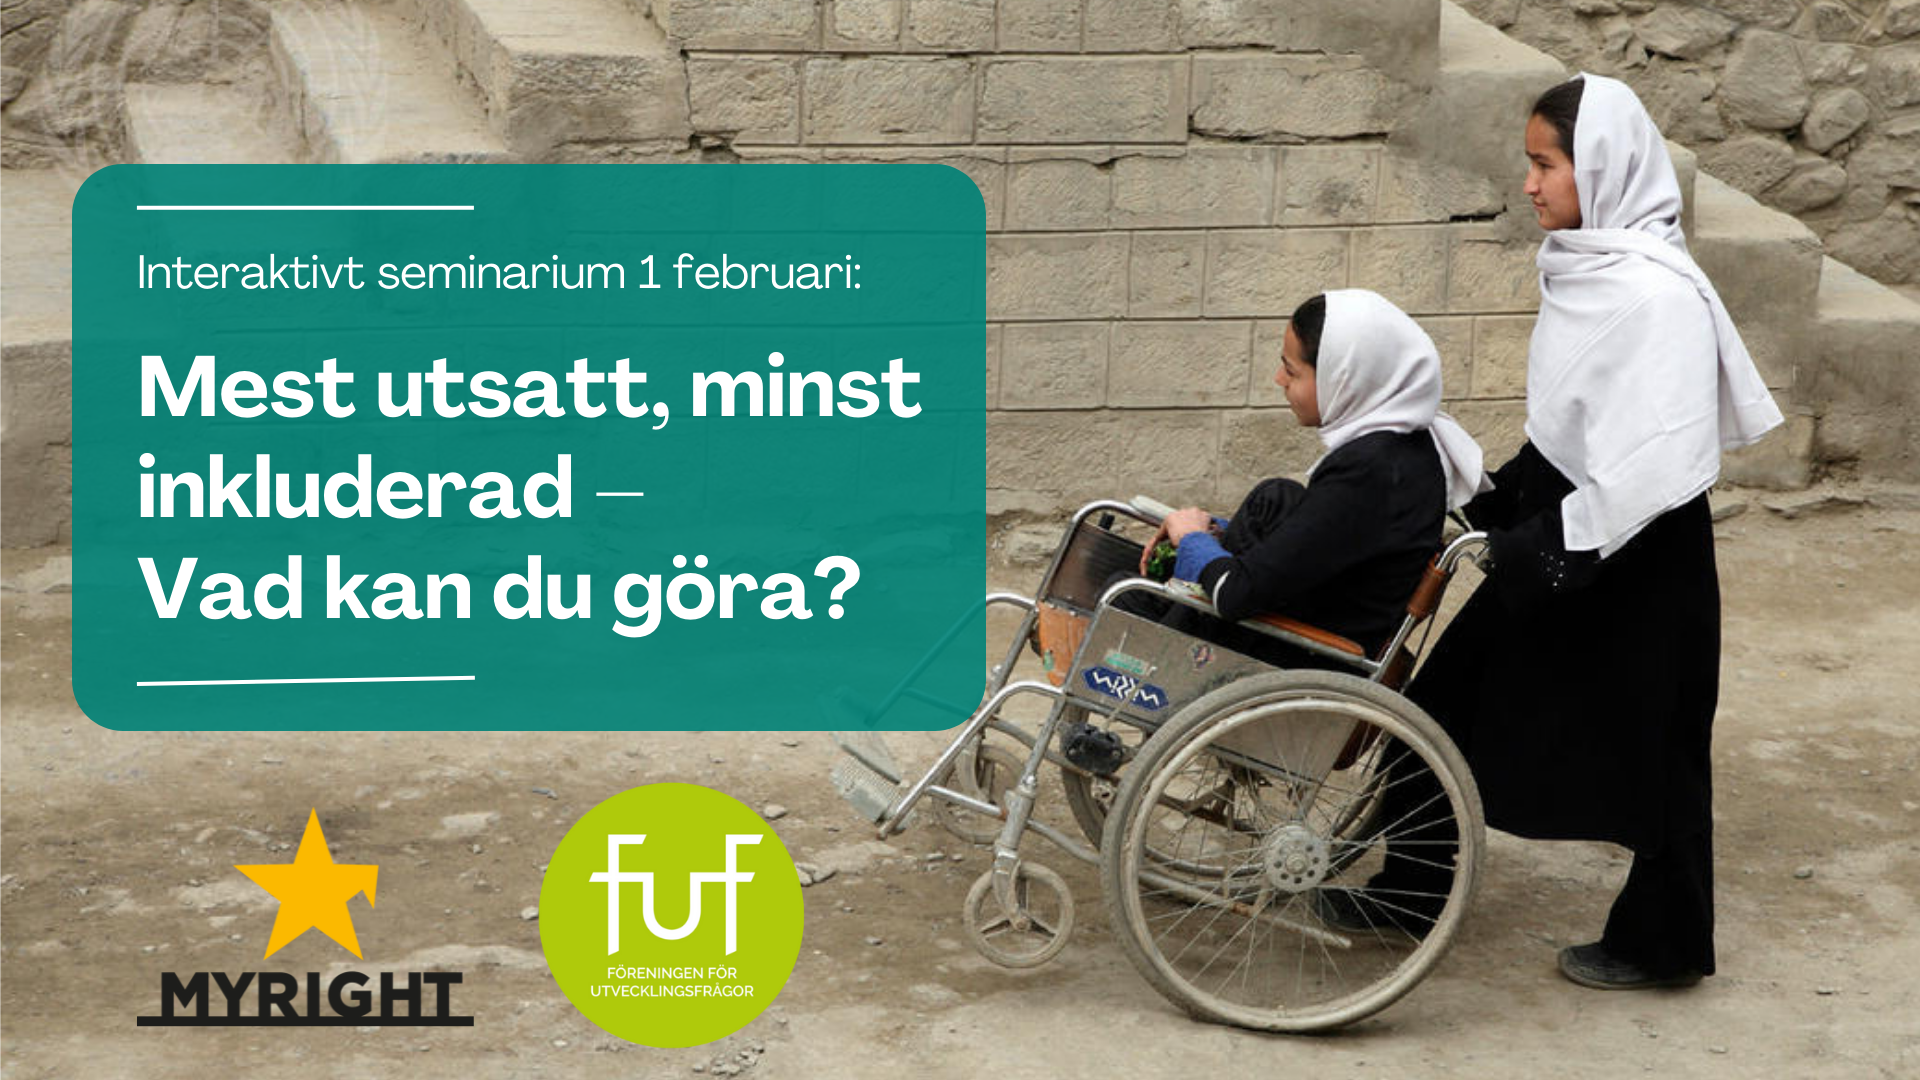 Banner showing the title and date of the seminar, as well as MyRights and FUF's logos. The background image shows two girls with shawls around their heads. One girl drives the other in a wheelchair.